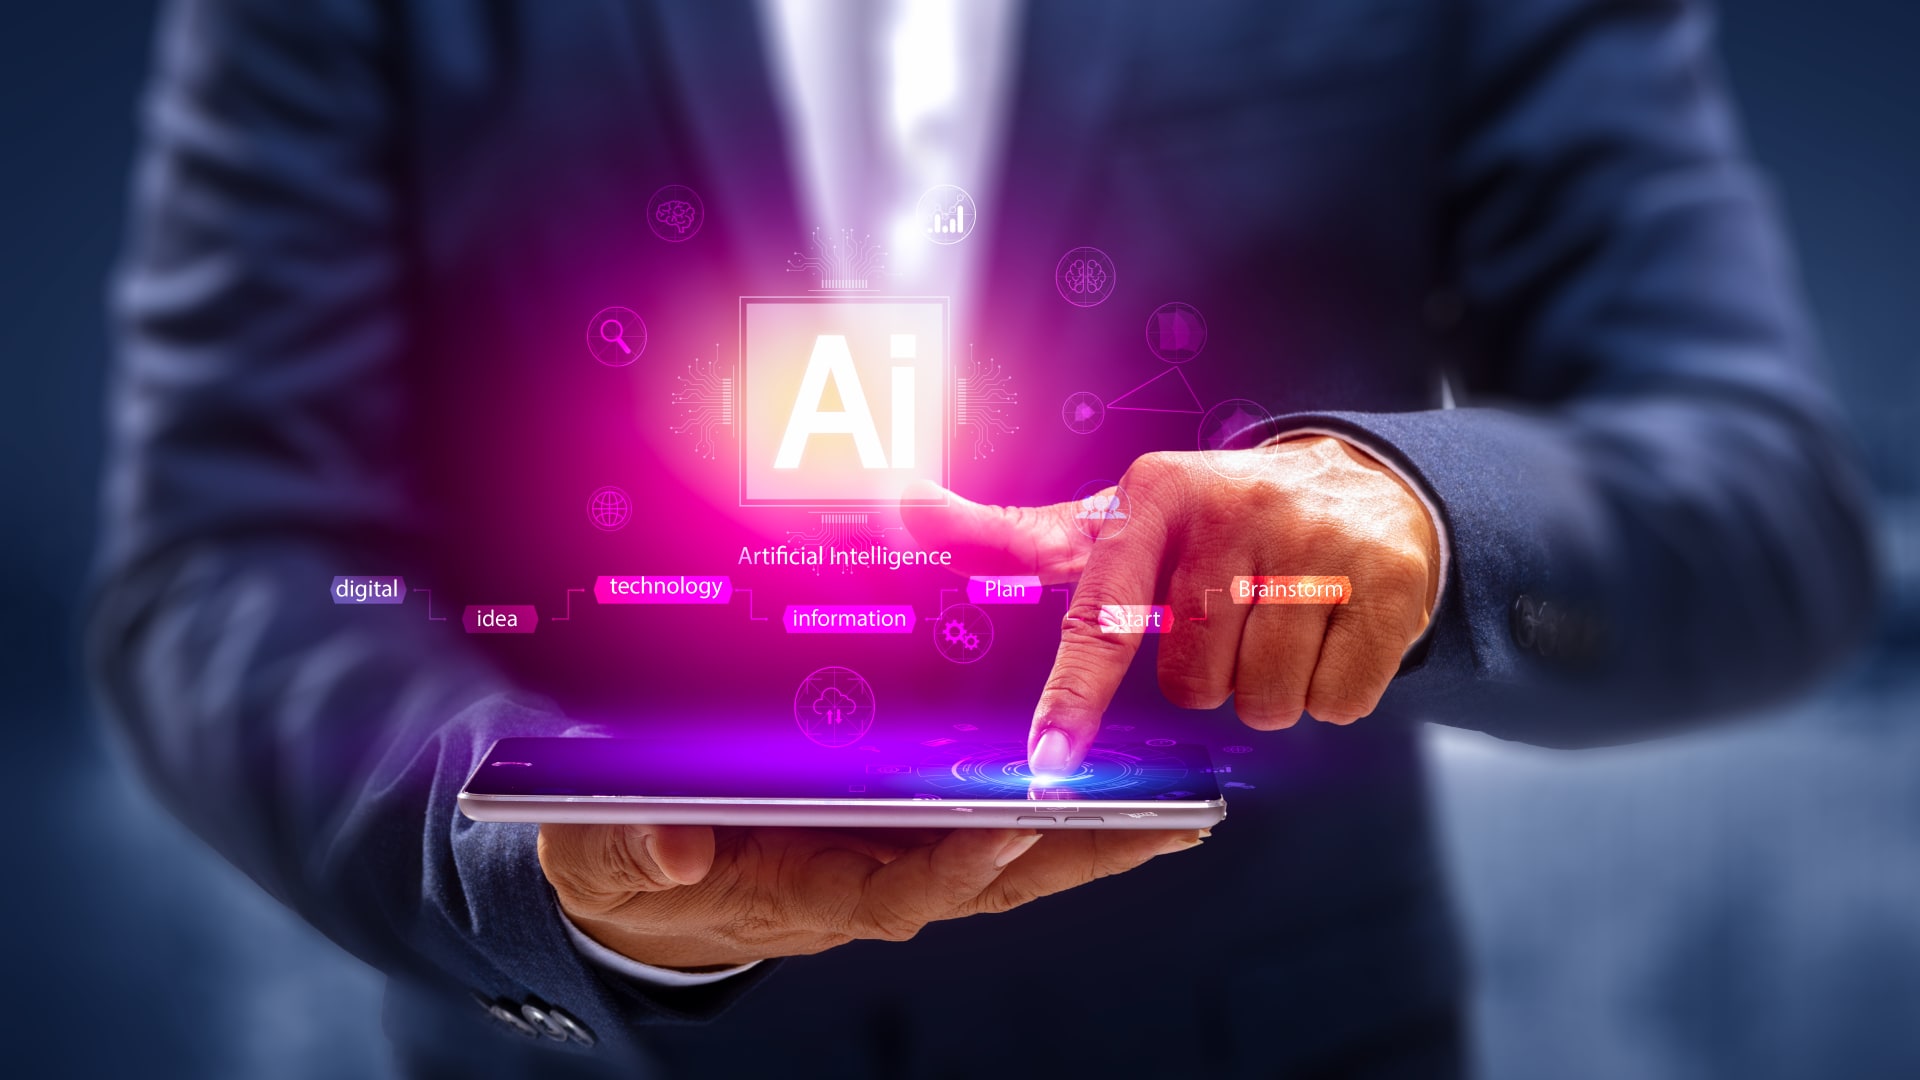 World’s first major act to regulate AI passed by European lawmakers